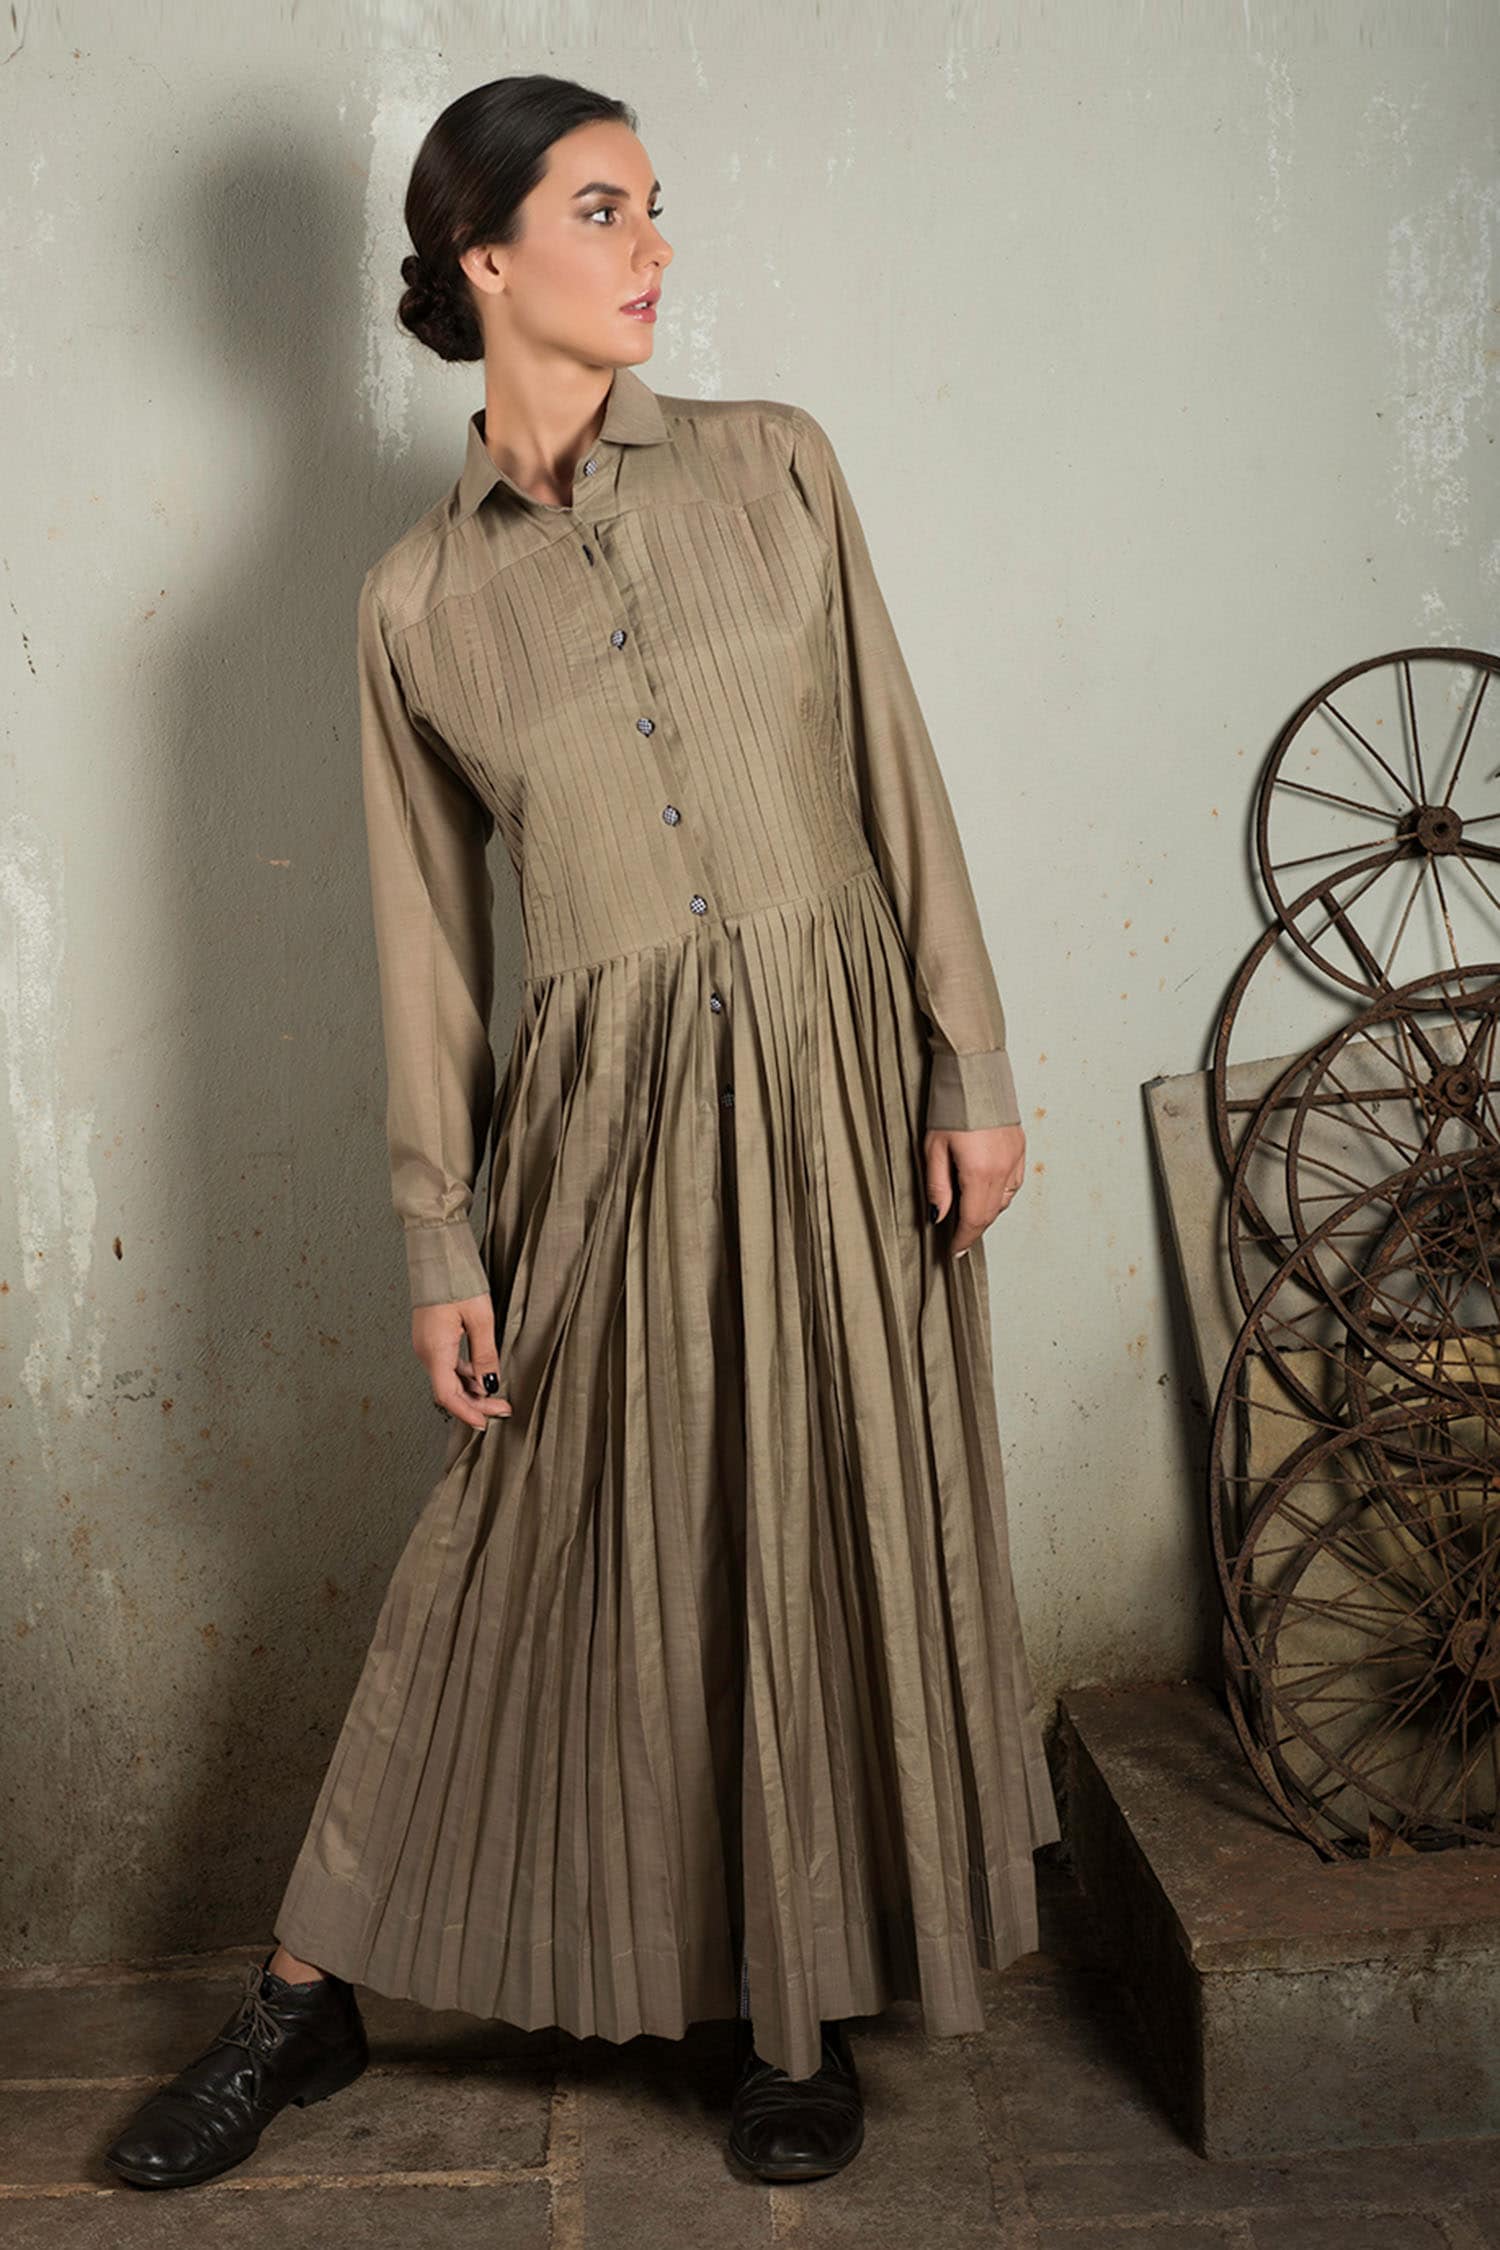 Buy Beige Cotton Silk by Pleated Aza Collar Dress Shirt Online Chillosophy Maxi For at Women